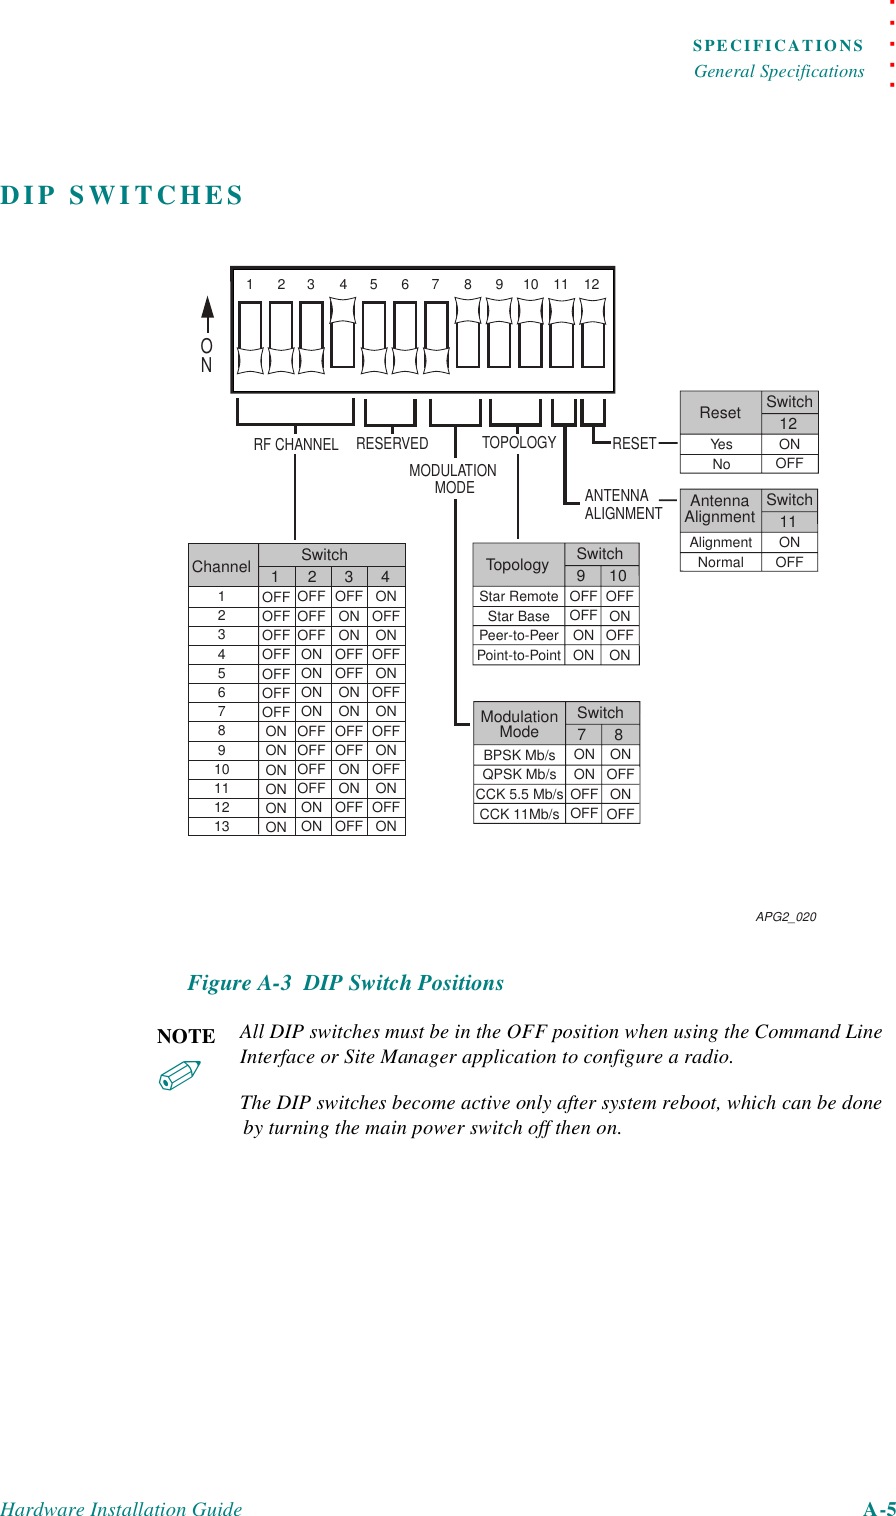 . . . . .SPECIFICATIONSGeneral SpecificationsHardware Installation Guide A-5DIP SWITCHESFigure A-3  DIP Switch PositionsAll DIP switches must be in the OFF position when using the Command Line Interface or Site Manager application to configure a radio.The DIP switches become active only after system reboot, which can be done by turning the main power switch off then on.123456789101112ONRF CHANNELSwitch1OFFOFFOFFOFFOFFOFFOFFONONONONONONOFFOFFOFFONONONONOFFOFFOFFOFFONONOFFONONOFFOFFONONOFFOFFONONOFFOFFONOFFONOFFONOFFONOFFONOFFONOFFON234ChannelTOPOLOGY RESETANTENNA ALIGNMENTAPG2_02012345678910111213Star RemoteStar BasePeer-to-PeerPoint-to-PointSwitch9OFFOFFONONOFFONOFFON10TopologyYesNoSwitch12ONOFFResetAlignmentNormalSwitch11ONOFFAntennaAlignmentBPSK Mb/sQPSK Mb/sCCK 5.5 Mb/sCCK 11Mb/sSwitch7ONONOFFOFFONOFFONOFF8ModulationModeMODULATION MODERESERVEDNOTE✐